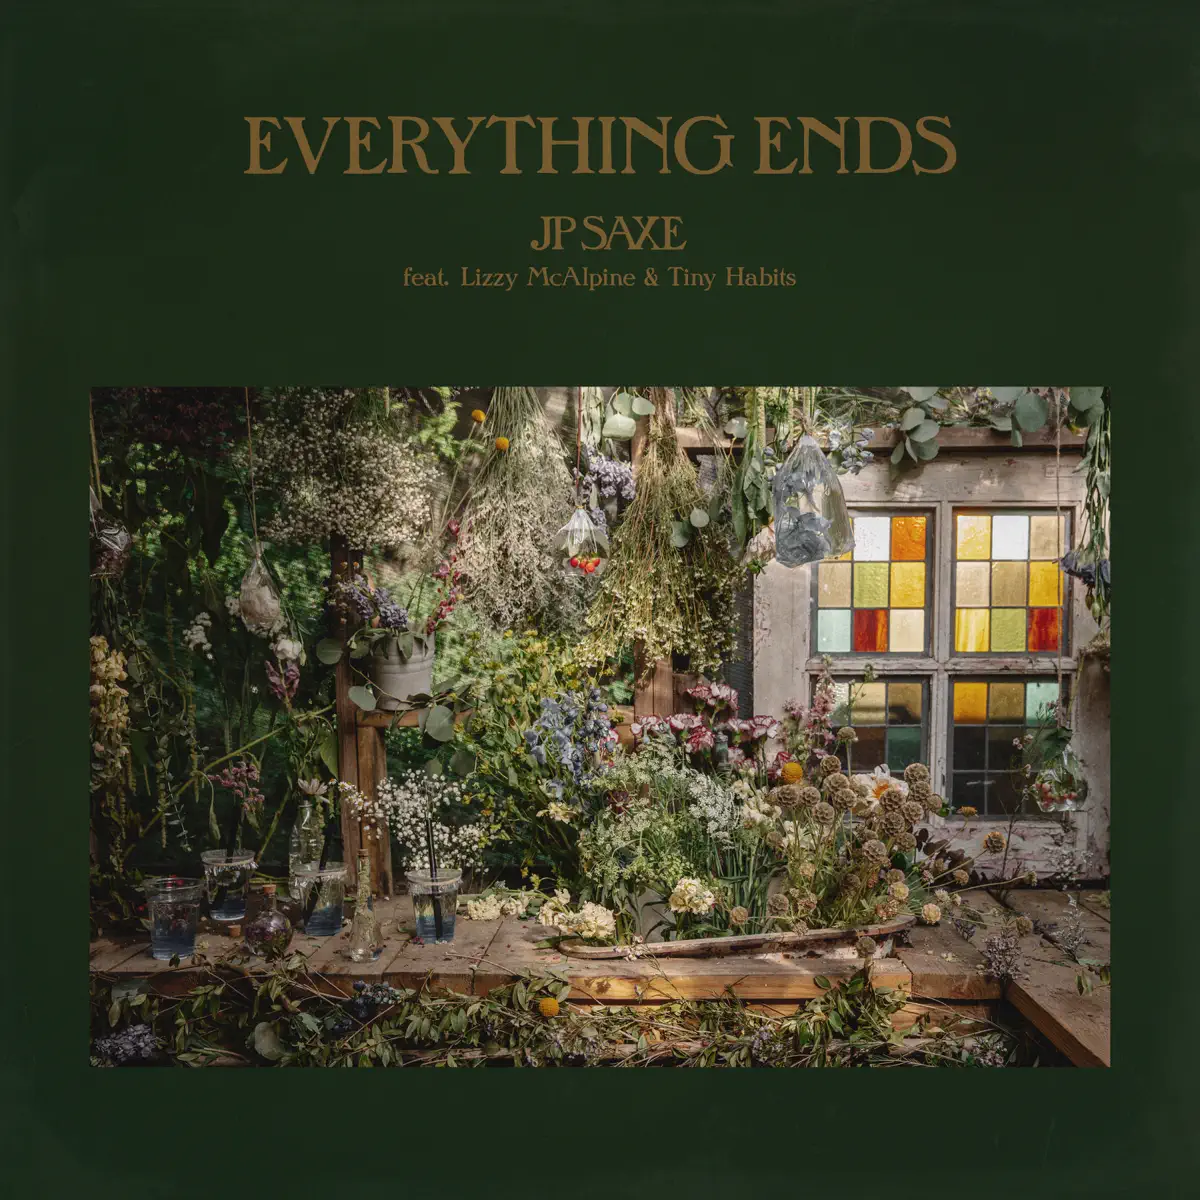 JP Saxe - Everything Ends (feat. Lizzy McAlpine and Tiny Habits) - Single (2023) [iTunes Plus AAC M4A]-新房子